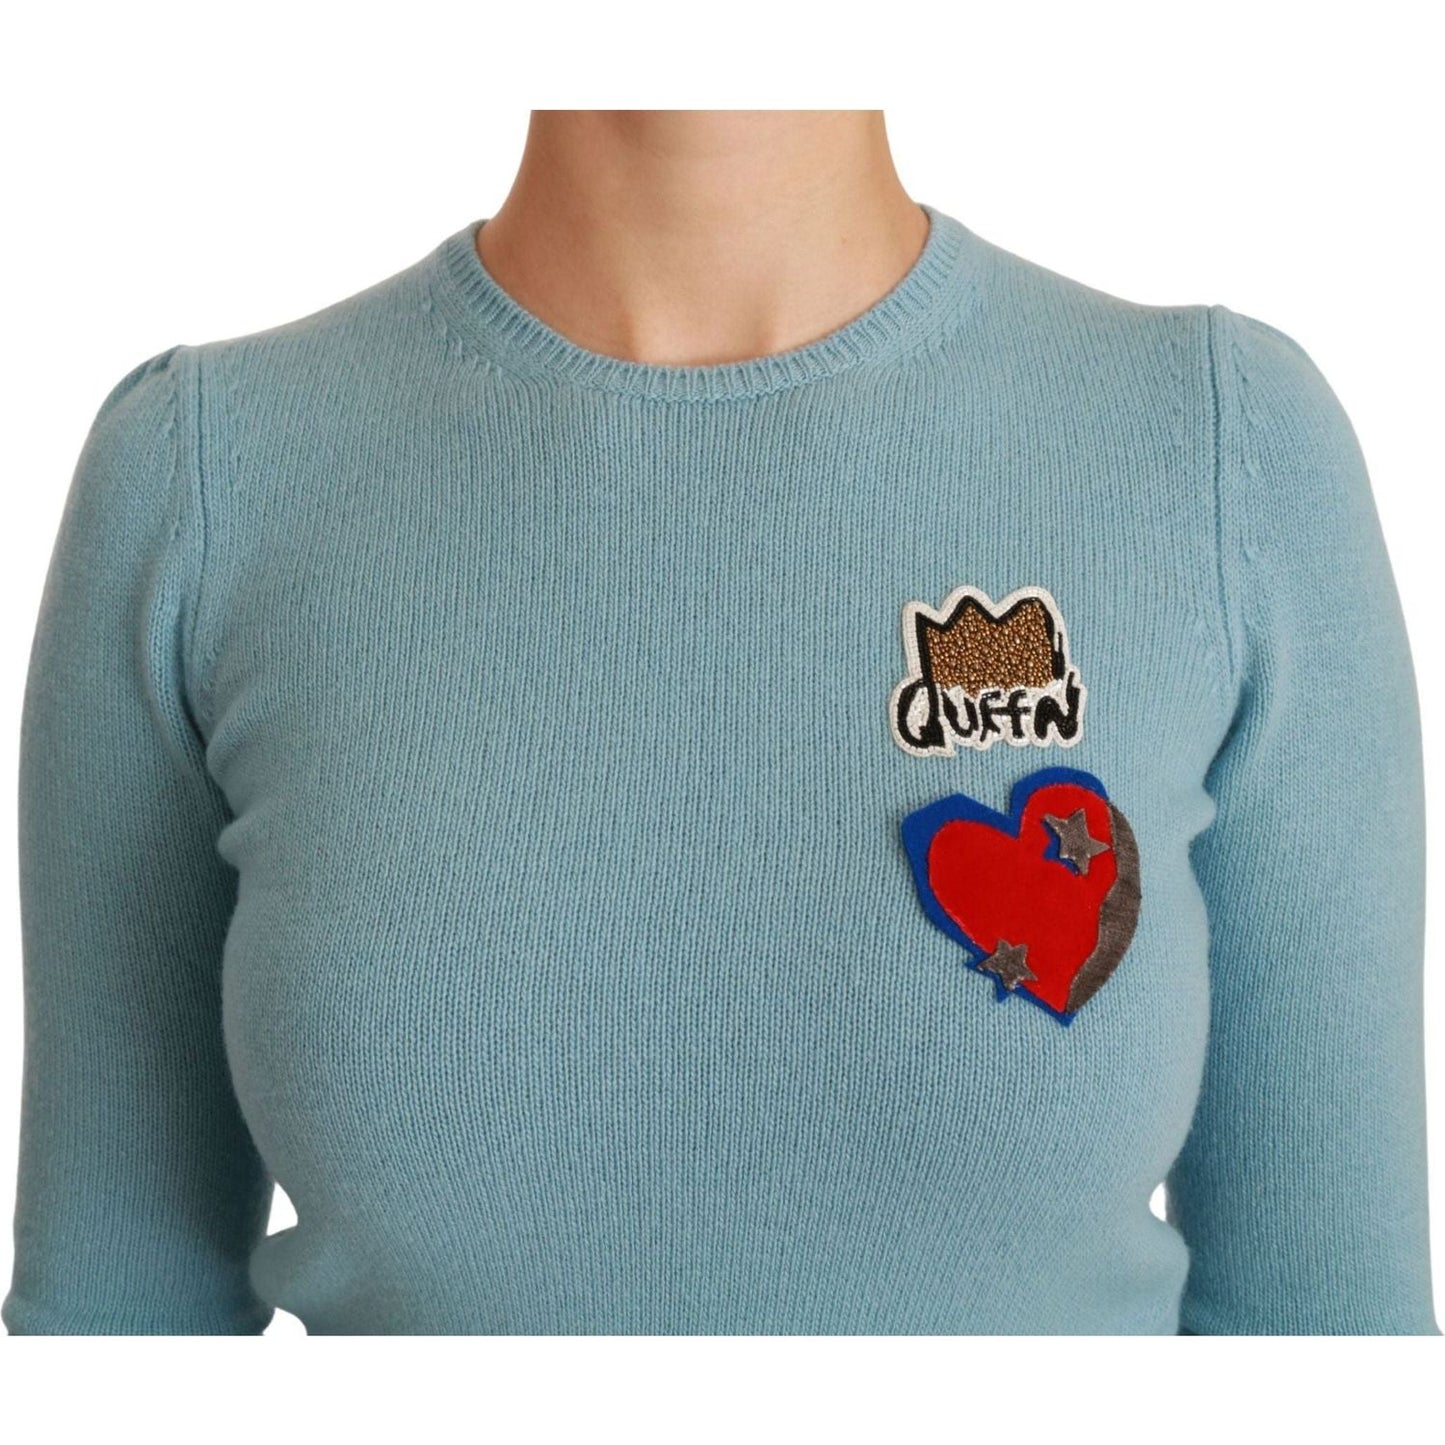 Dolce & Gabbana Queen Heart Beaded Wool Sweater WOMAN TOPS AND SHIRTS blue-wool-queen-heart-pullover-sweater IMG_7180-scaled-c5cba6ce-197.jpg